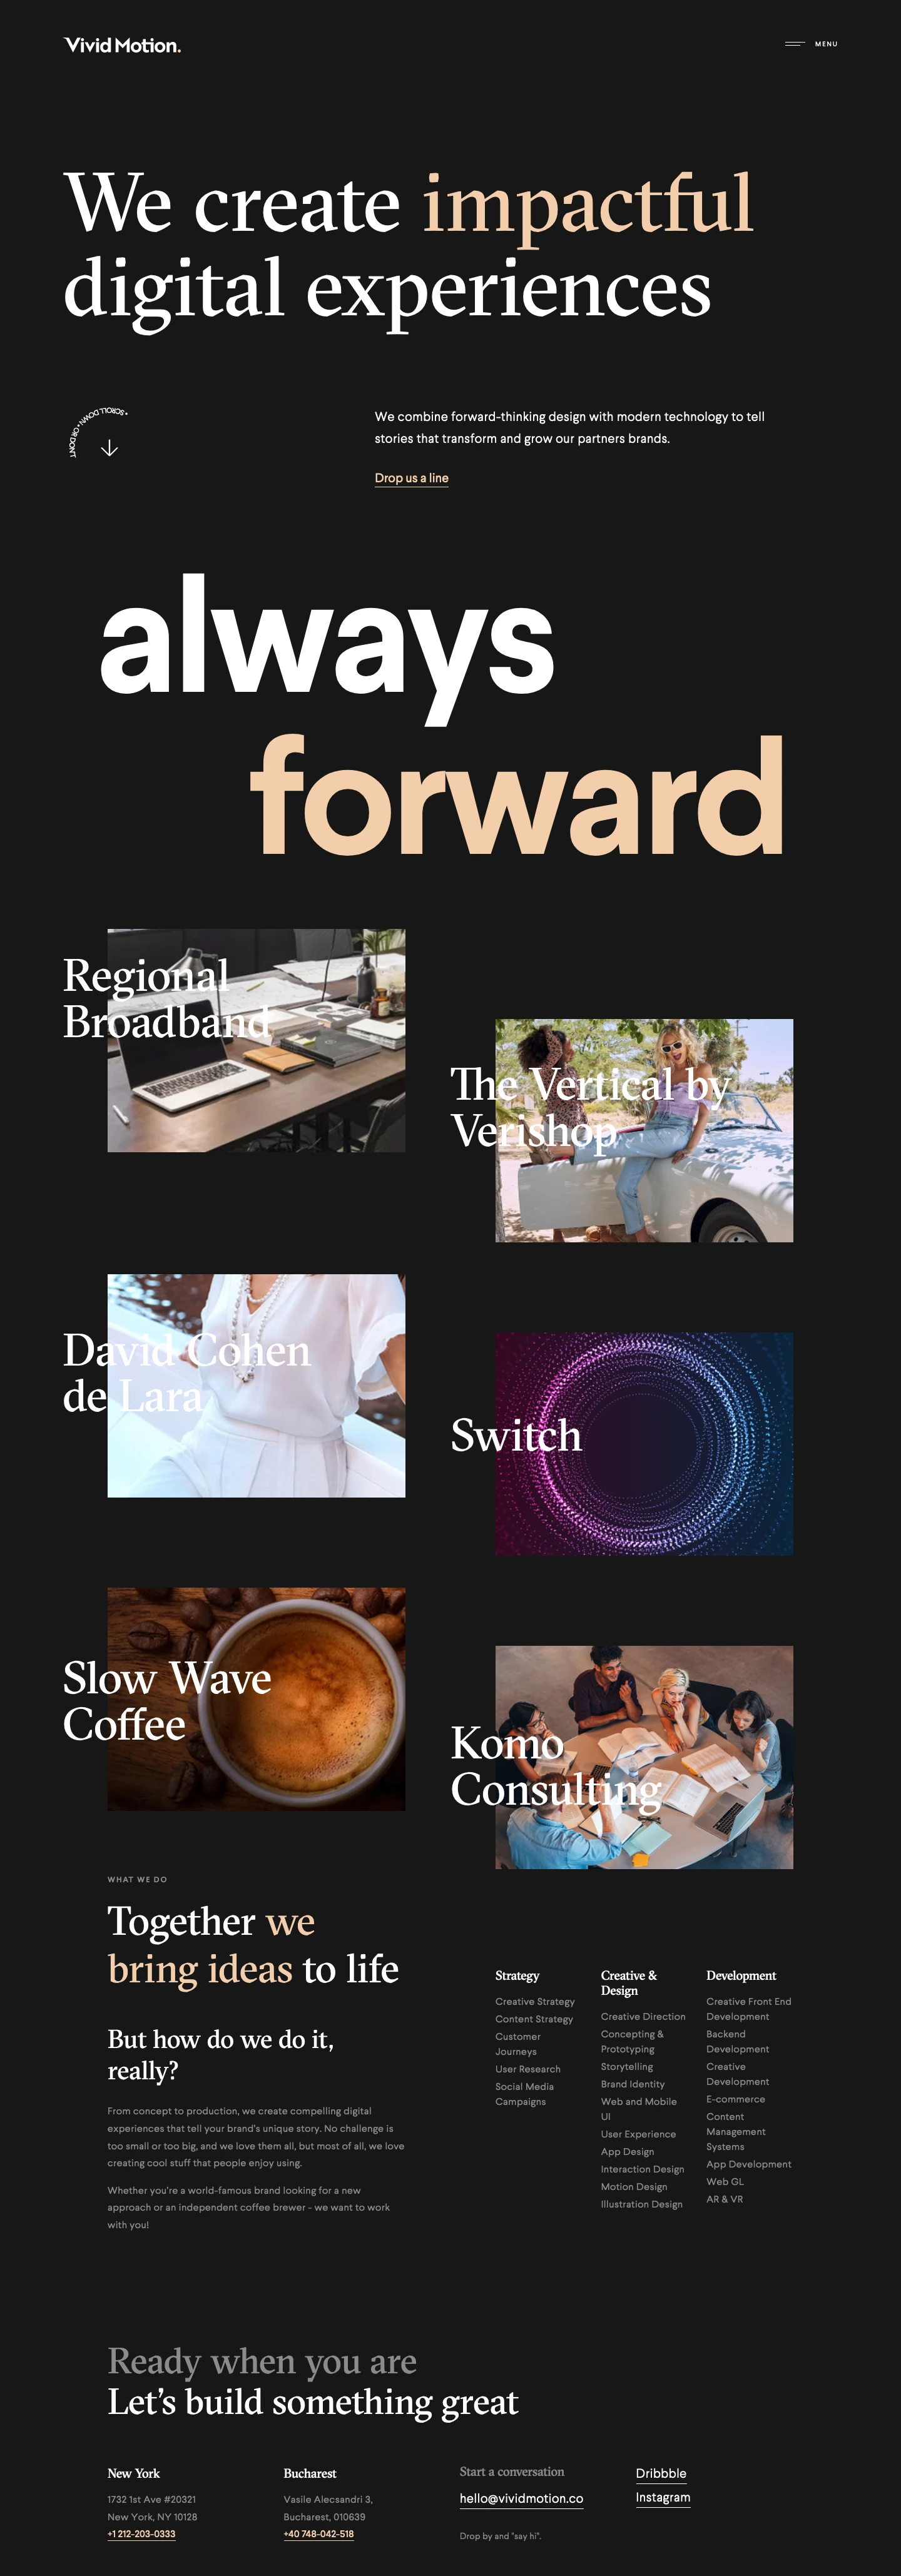 Vivid Motion Landing Page Example: We create impactful digital experiences. We combine forward-thinking design with modern technology to tell stories that transform and grow our partners brands.